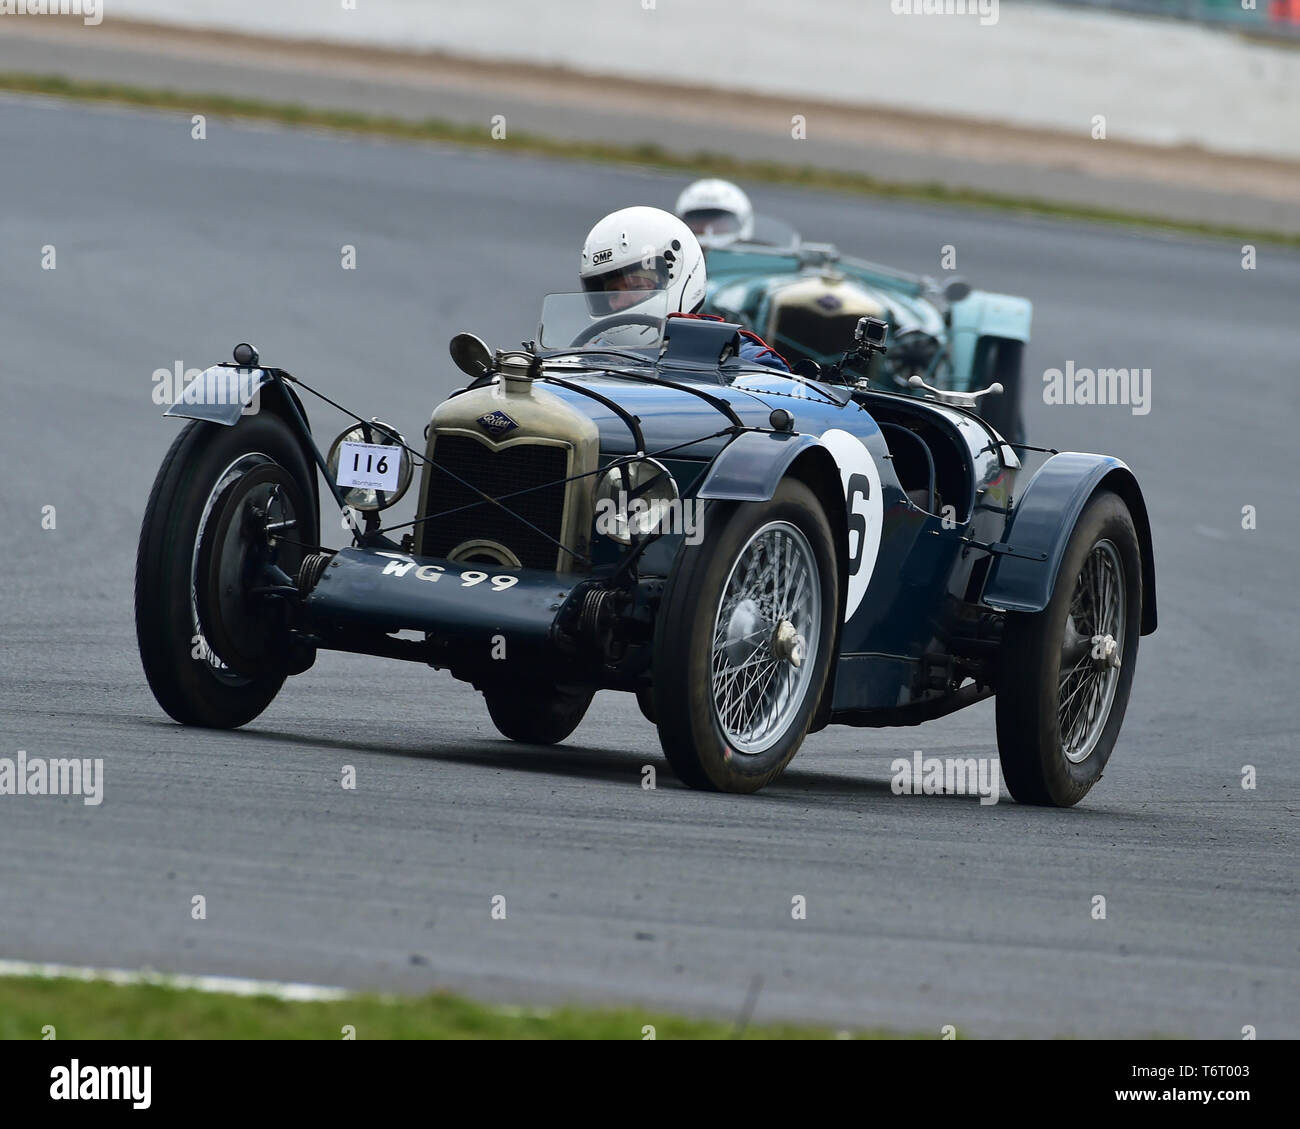 Andrew Baker, Riley Brooklands, Fox and Nicholl Trophy Race, VSCC, Formula Vintage, Silverstone, Northamptonshire, England, April 2019, circuit racing Stock Photo